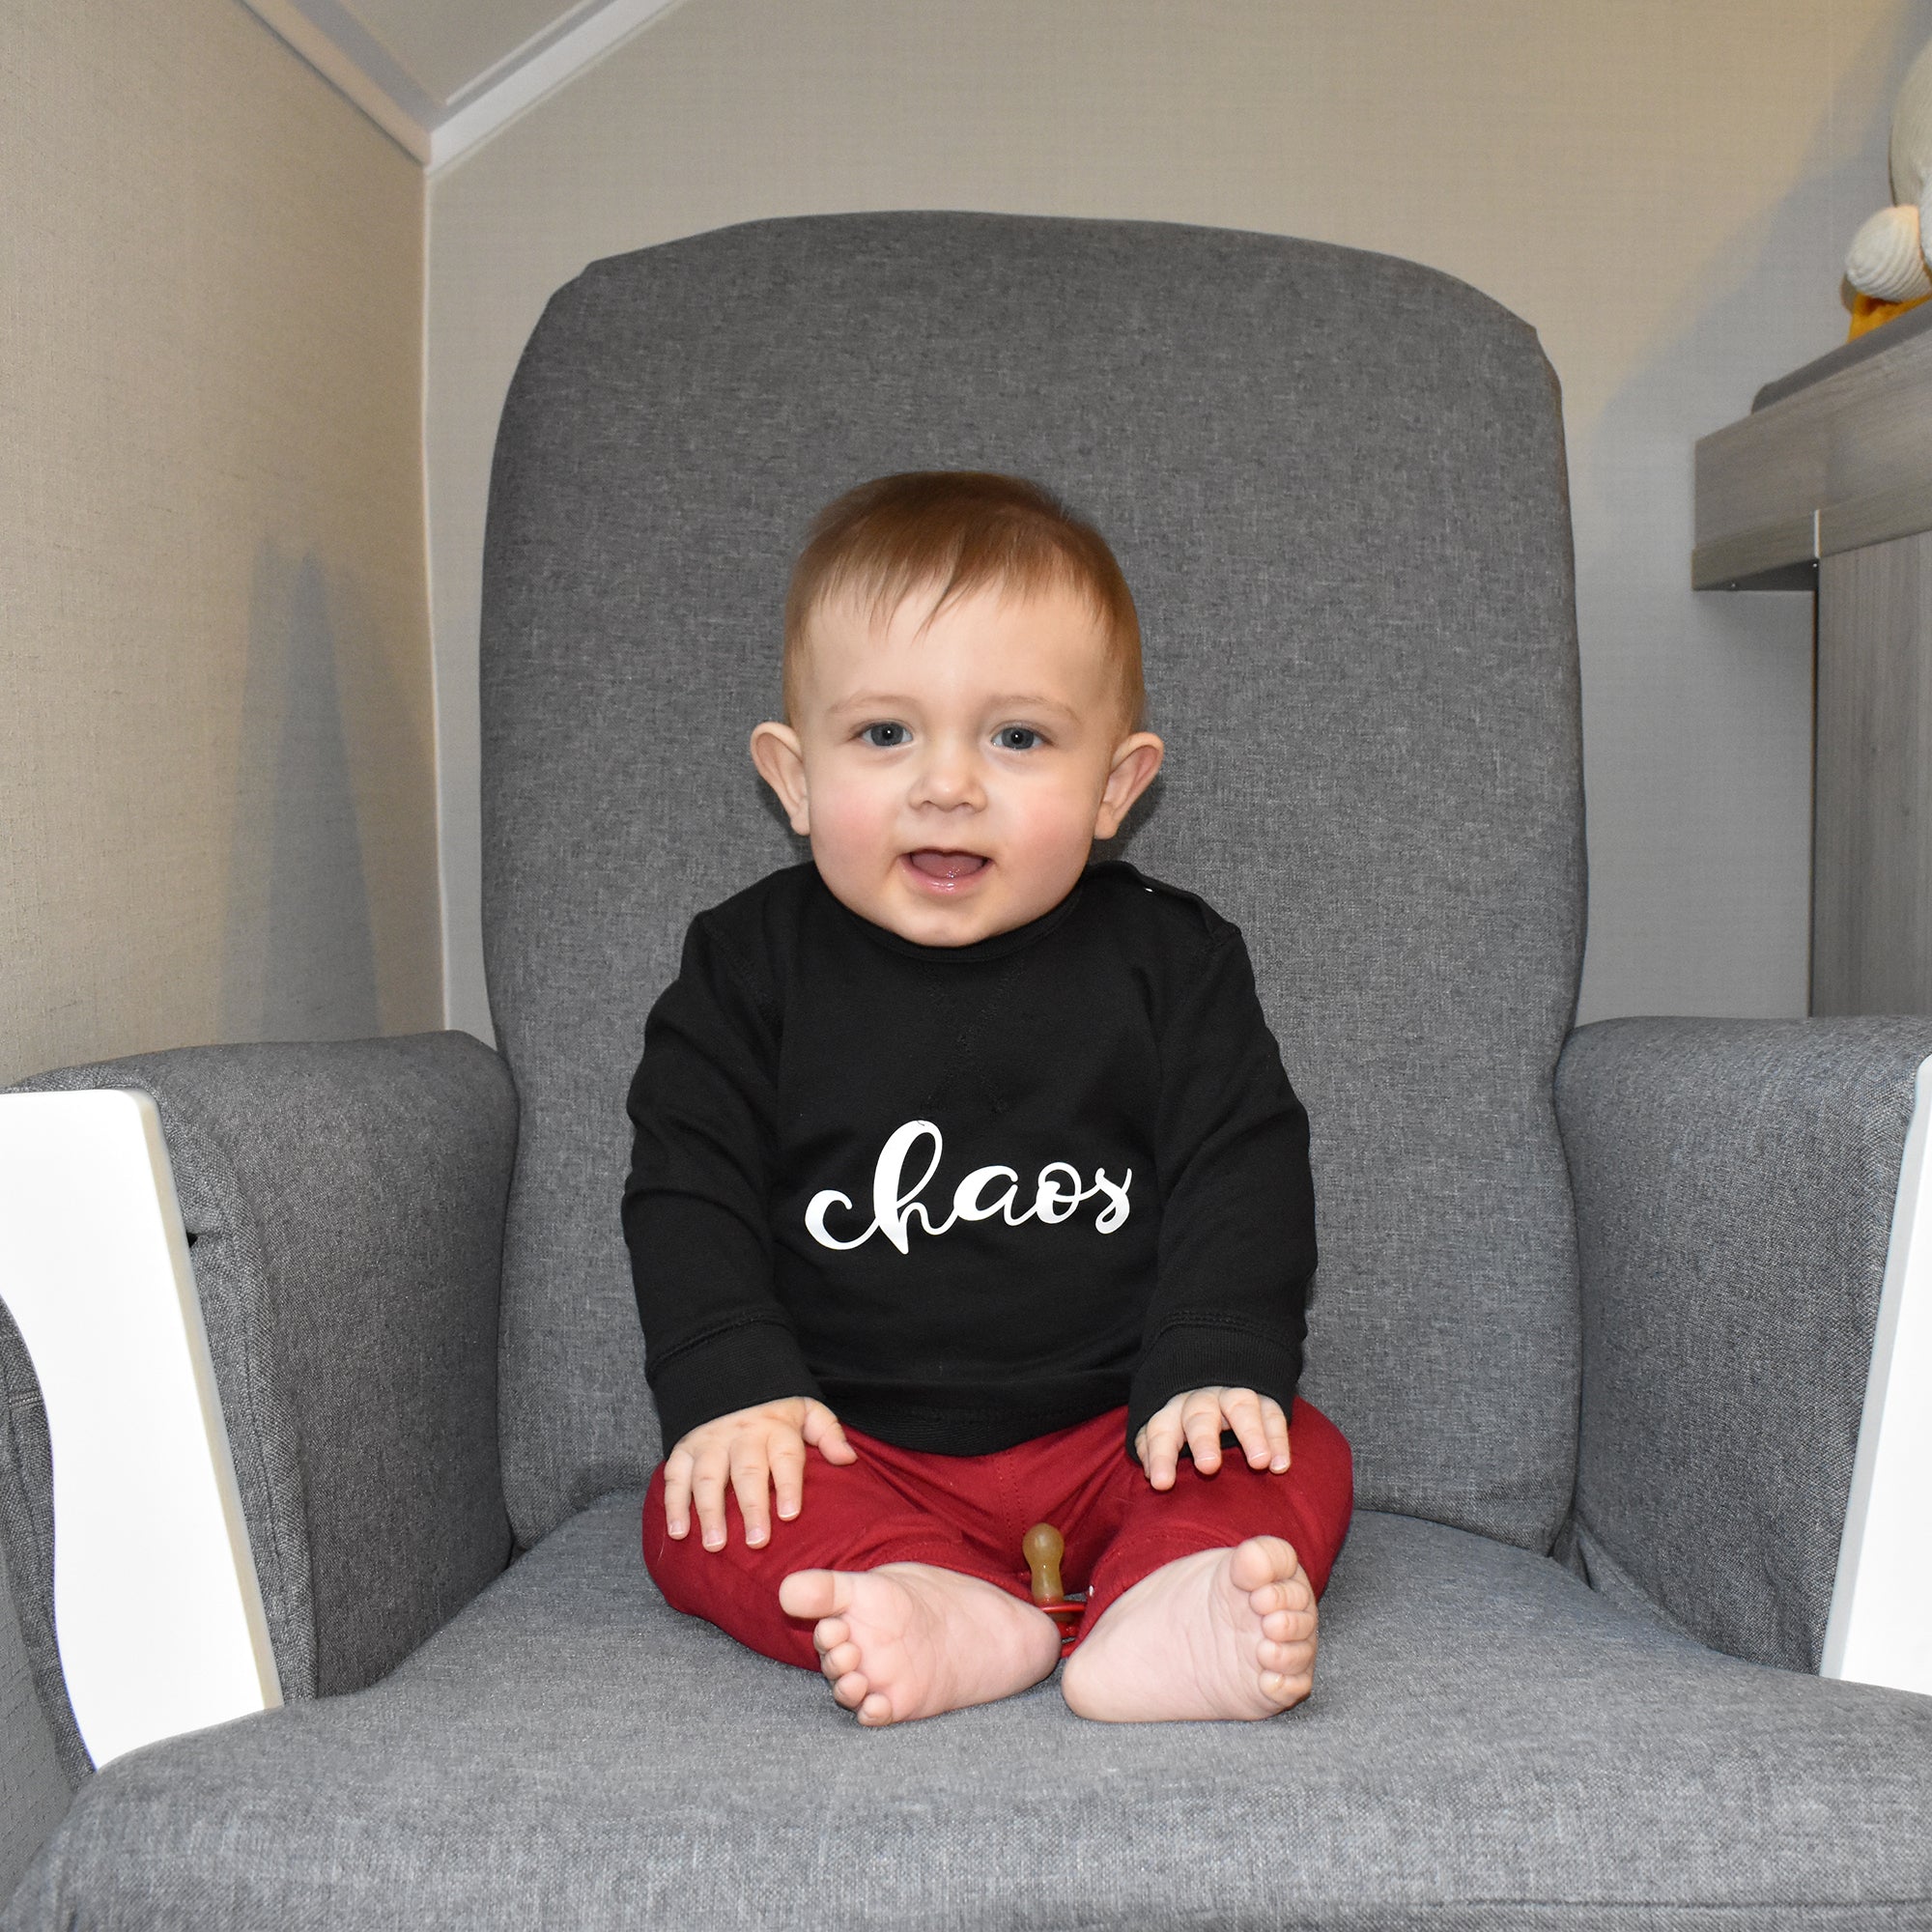 'Chaos' baby sweater